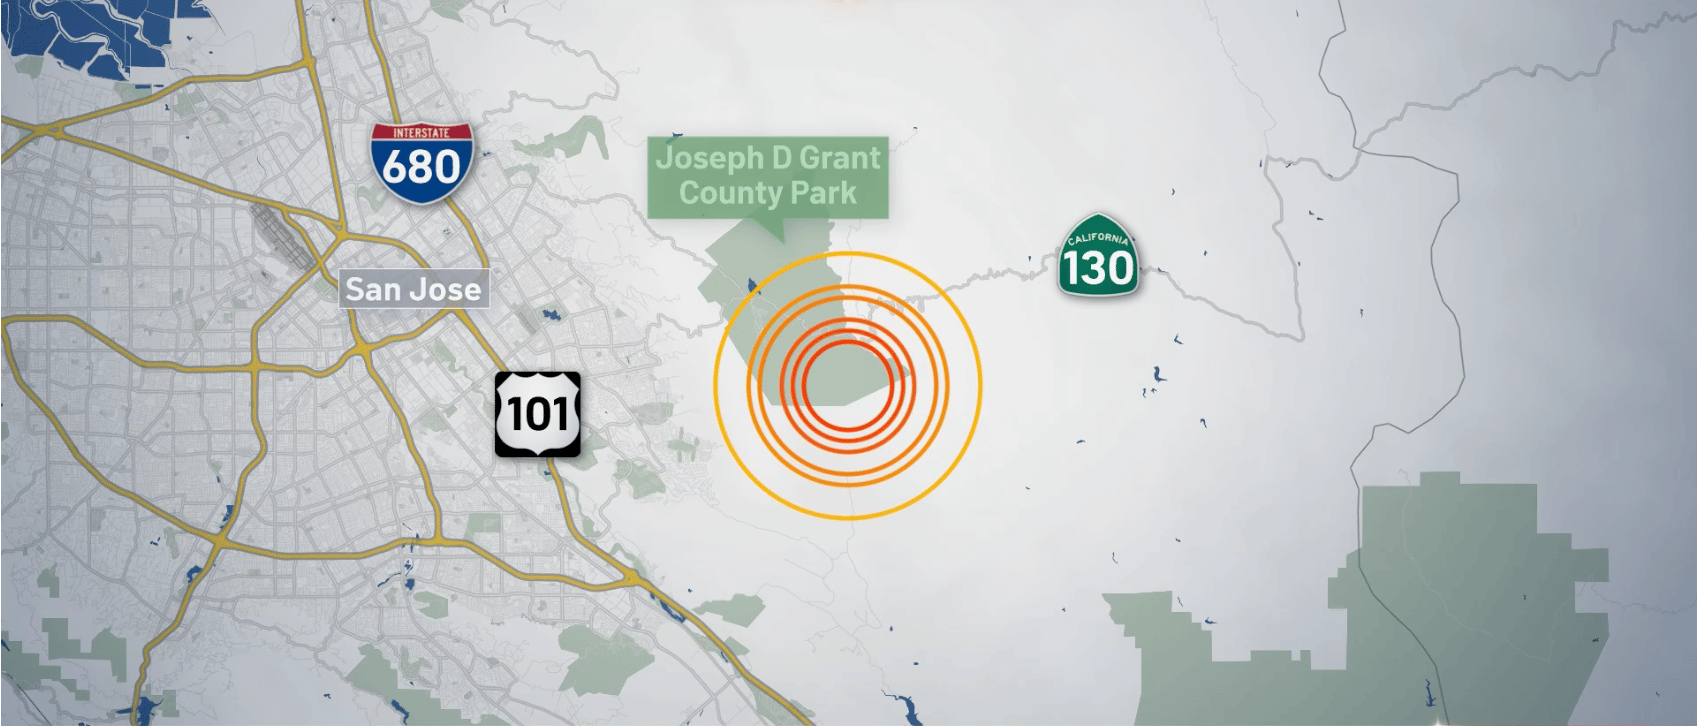 Magnitude 5.1 earthquake rattles SF Bay Area, Witnesses say it sounded “Thunderous”